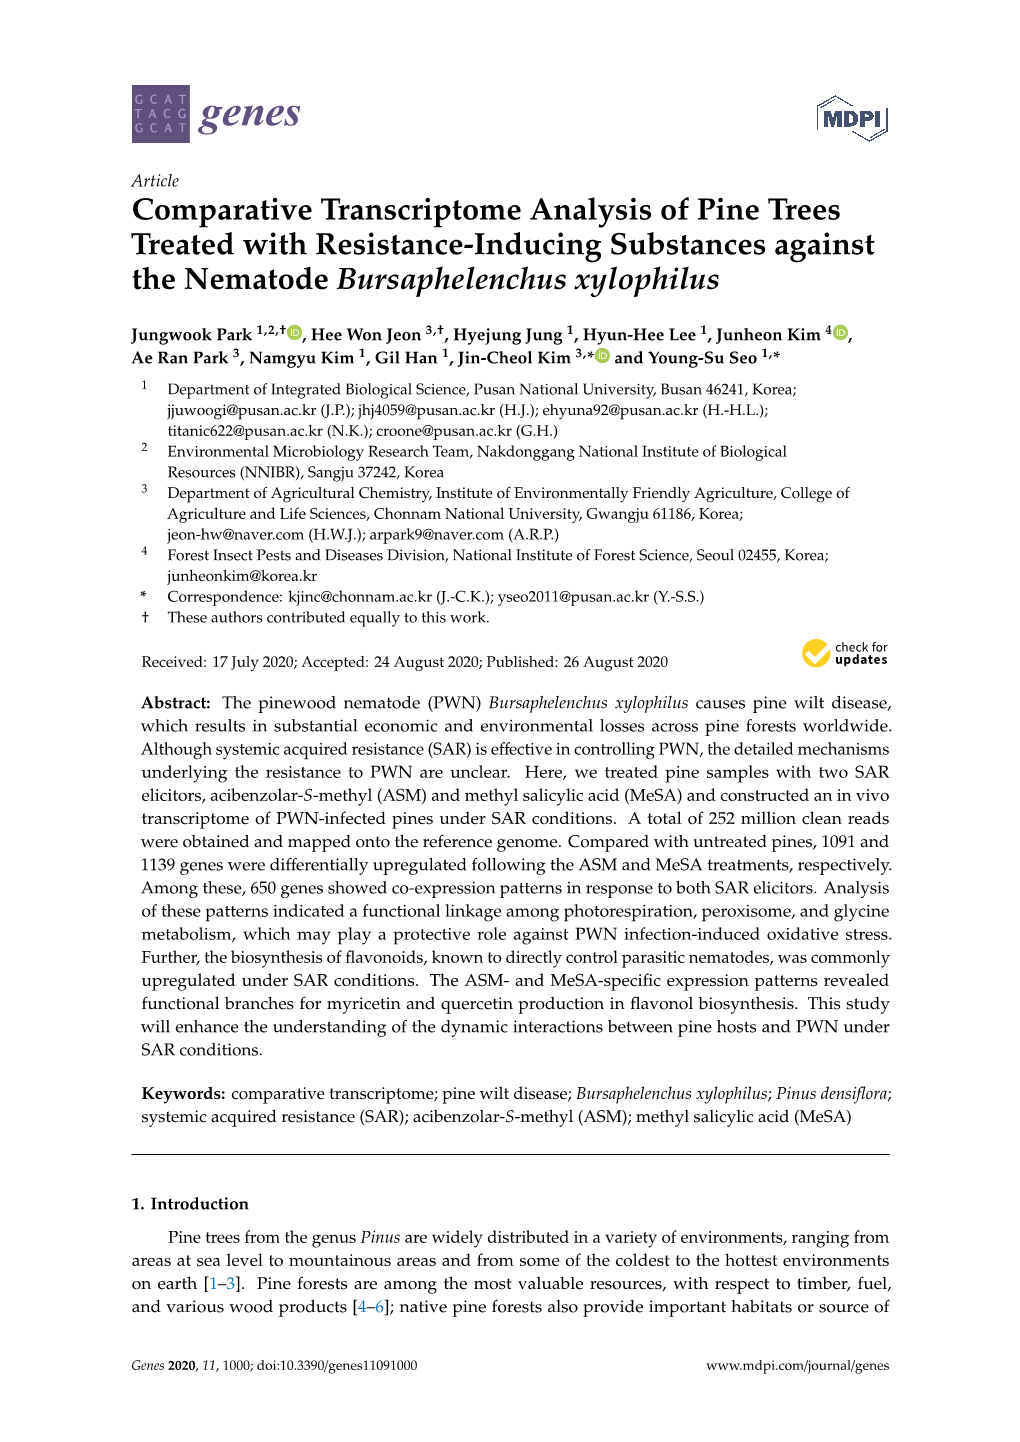 Comparative Transcriptome Analysis of Pine Trees Treated with Resistance-Inducing Substances Against the Nematode Bursaphelenchus Xylophilus